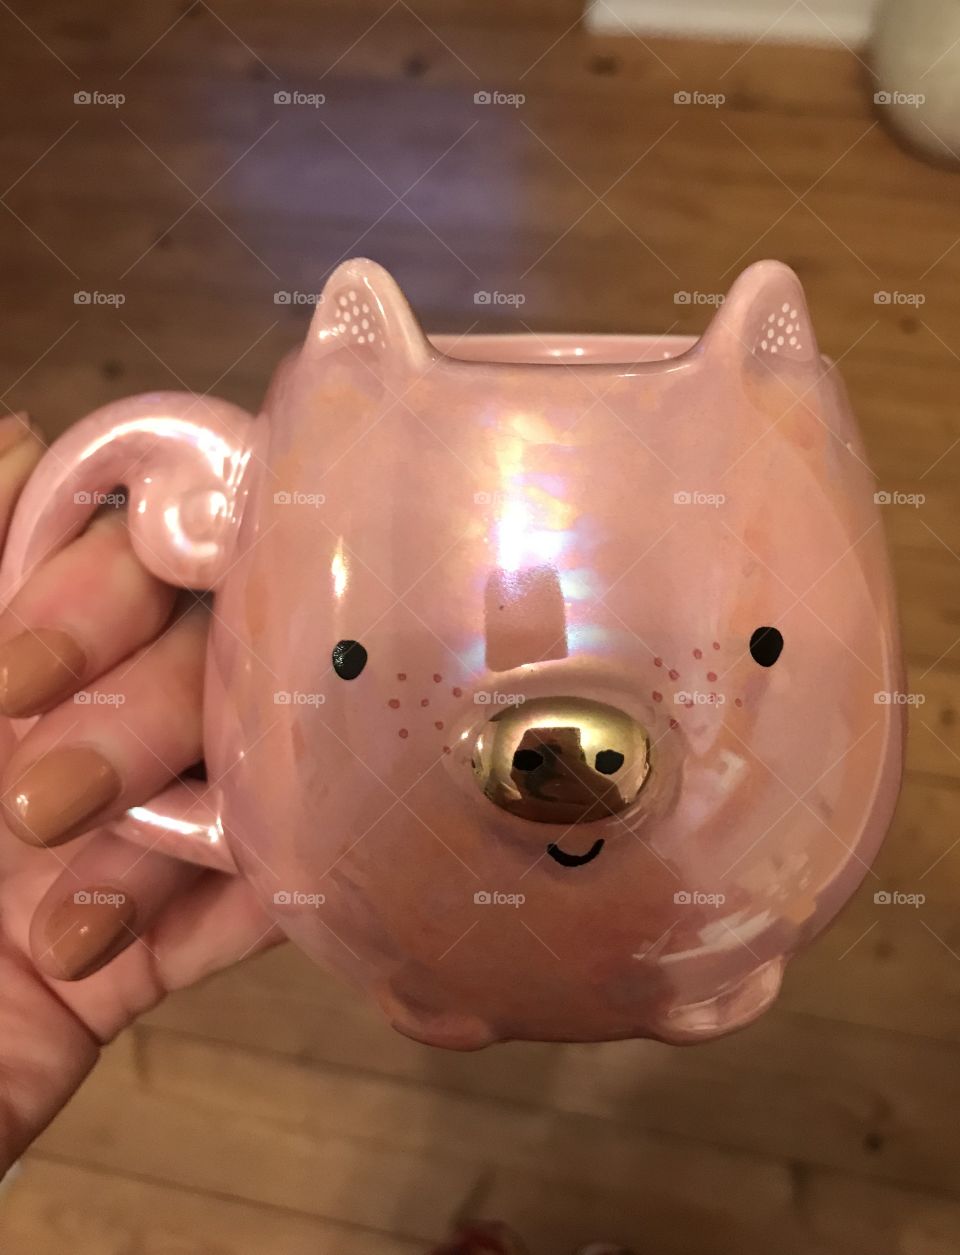 Pig cup